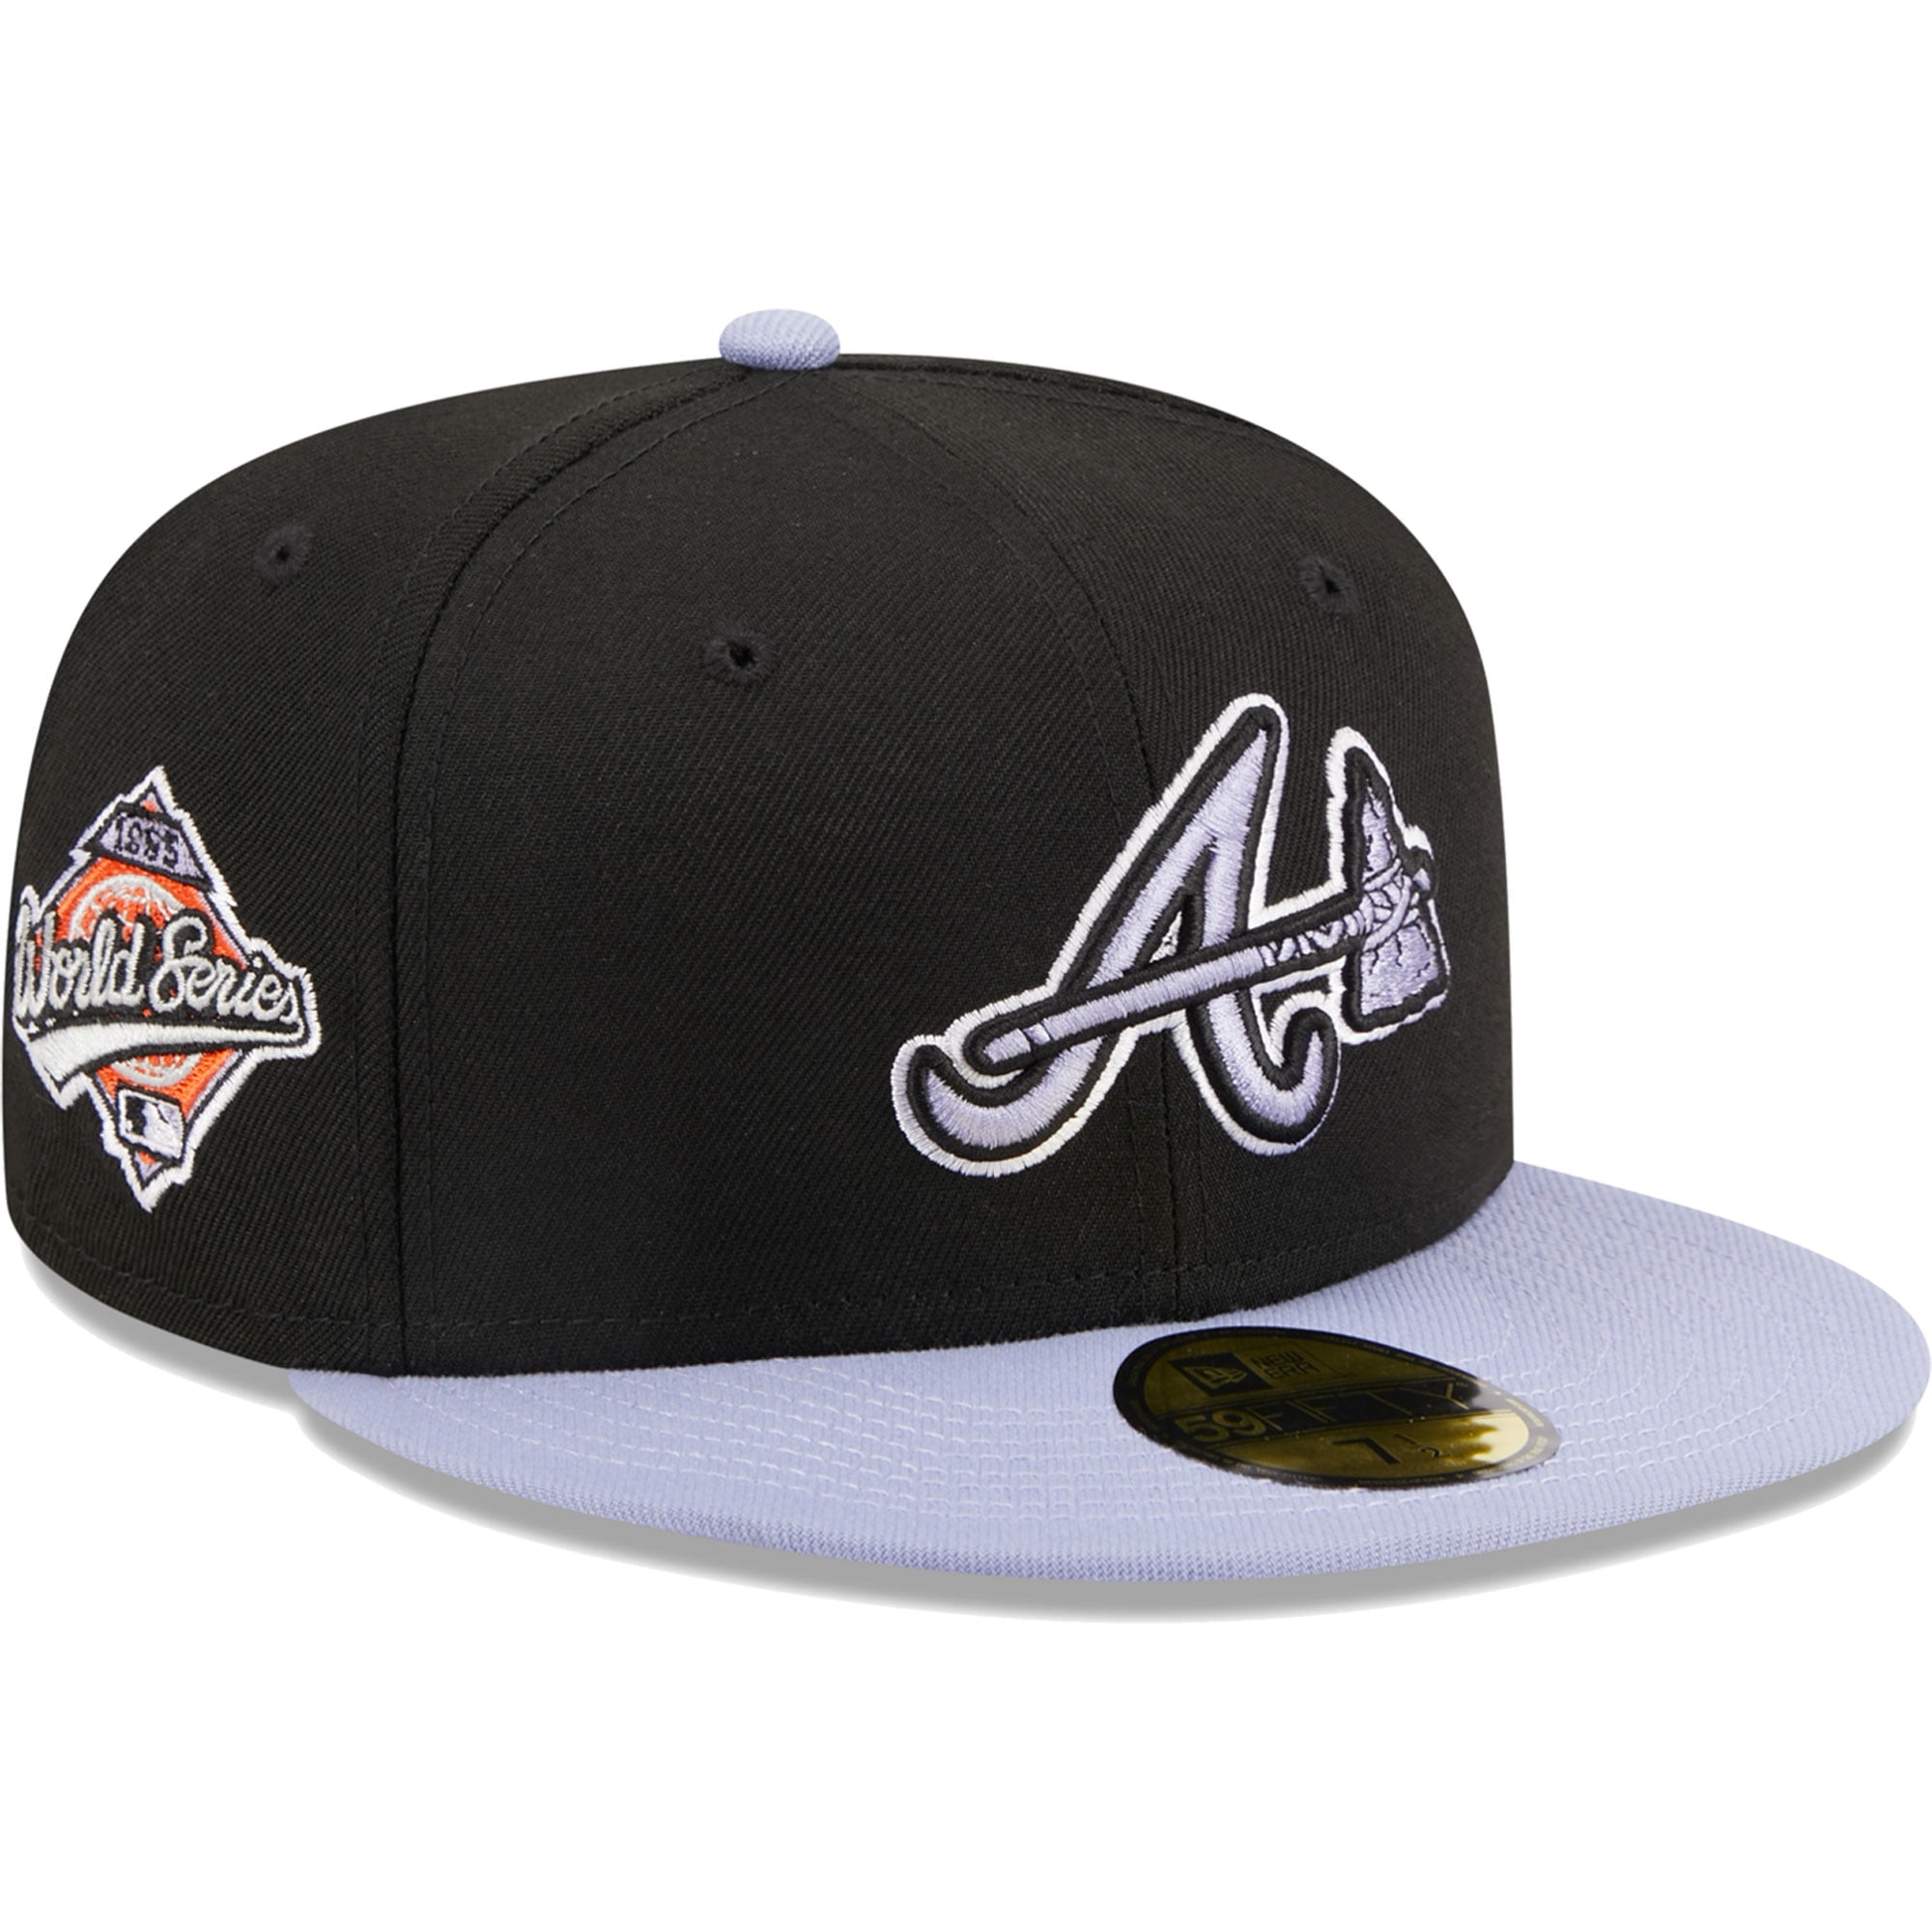 Men's New Era Black Atlanta Braves Side Patch 59FIFTY Fitted Hat 